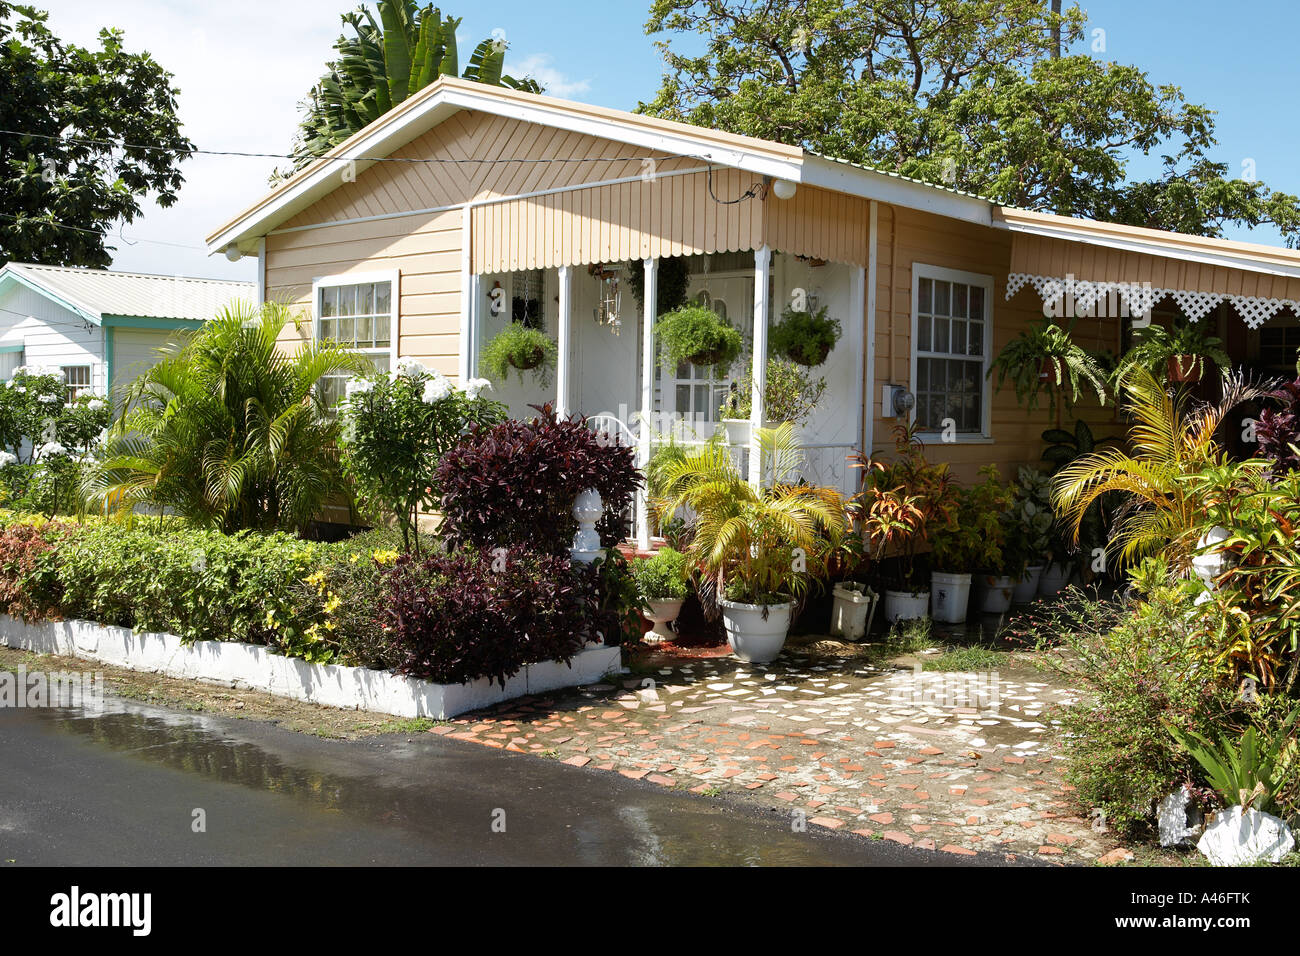 Rural house in Barbados Stock Photo